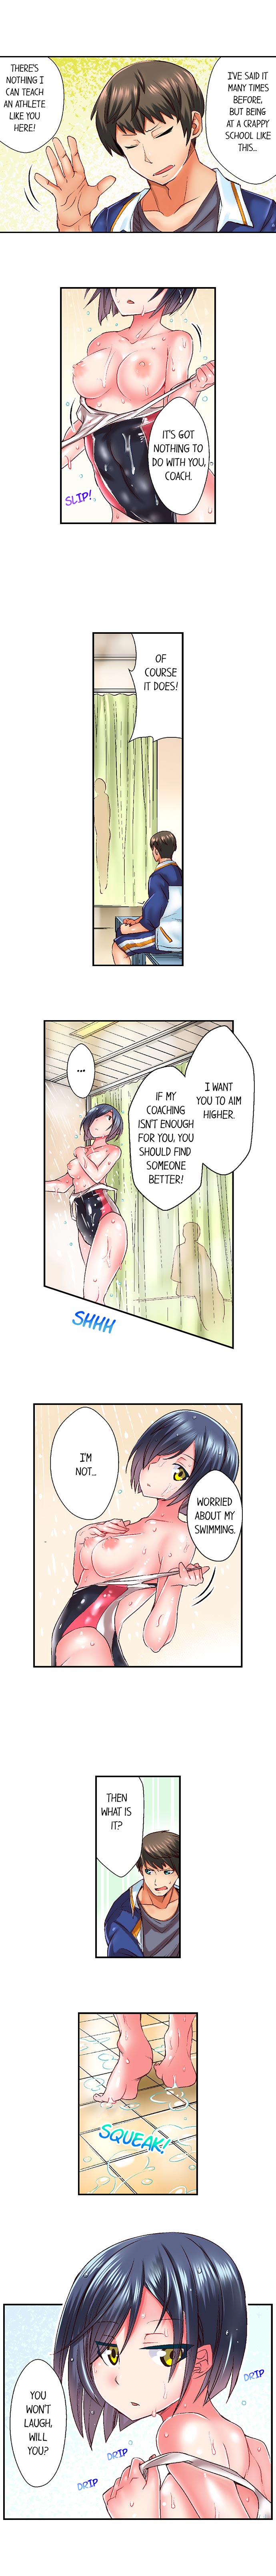 Athlete’s Strong Sex Drive - Chapter 1 Page 6